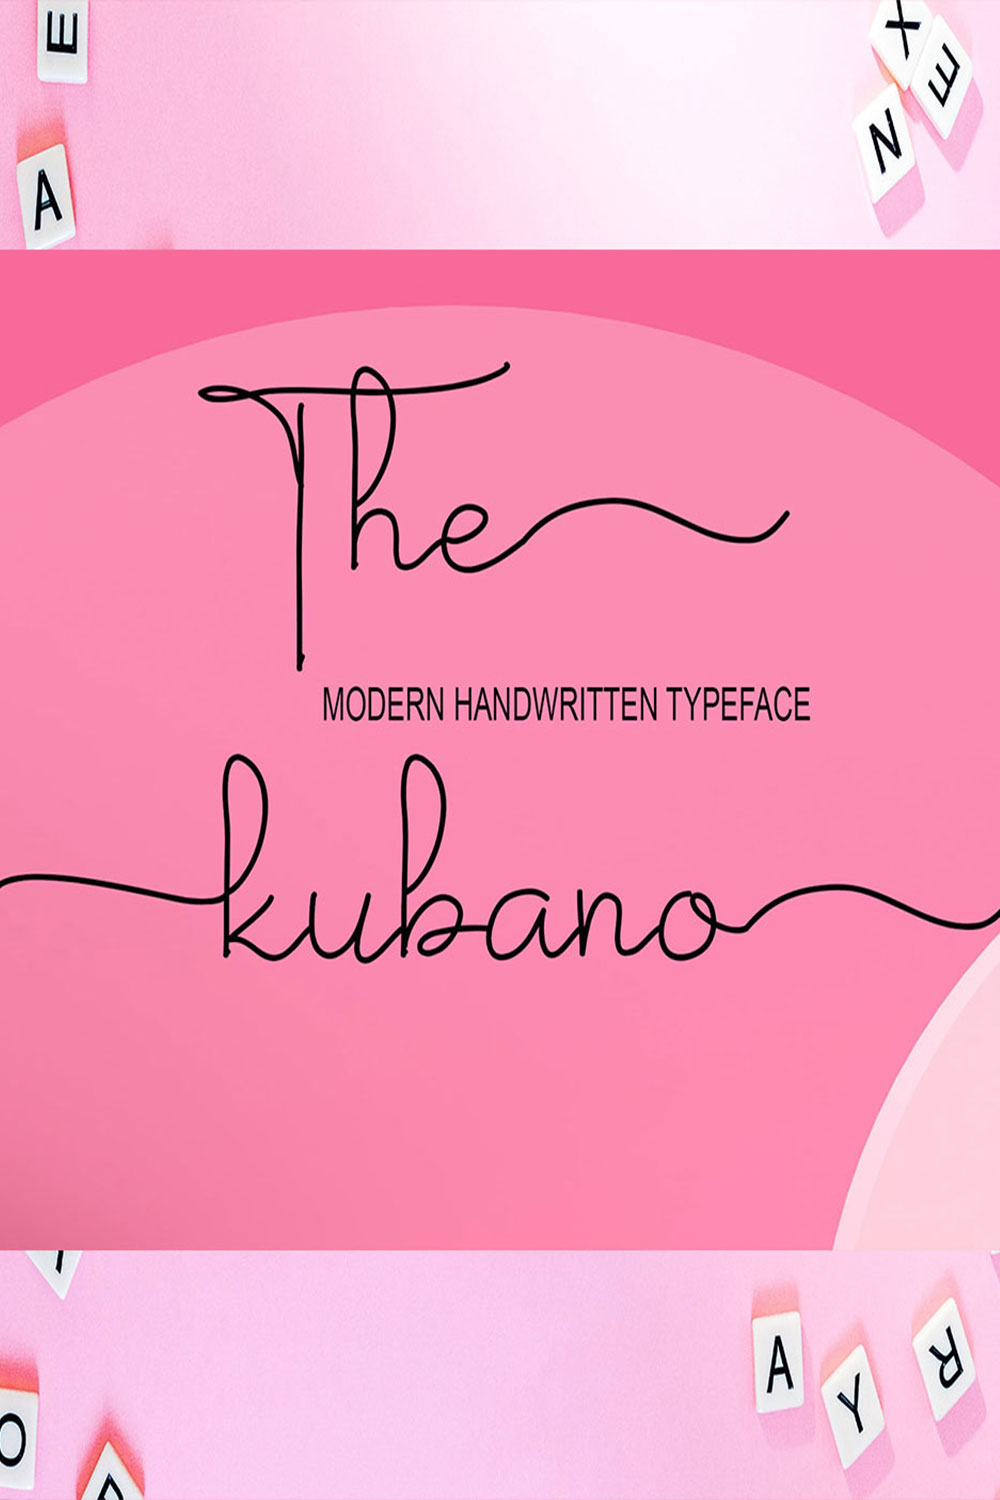 An image with text showing the beautiful font The Kubano.